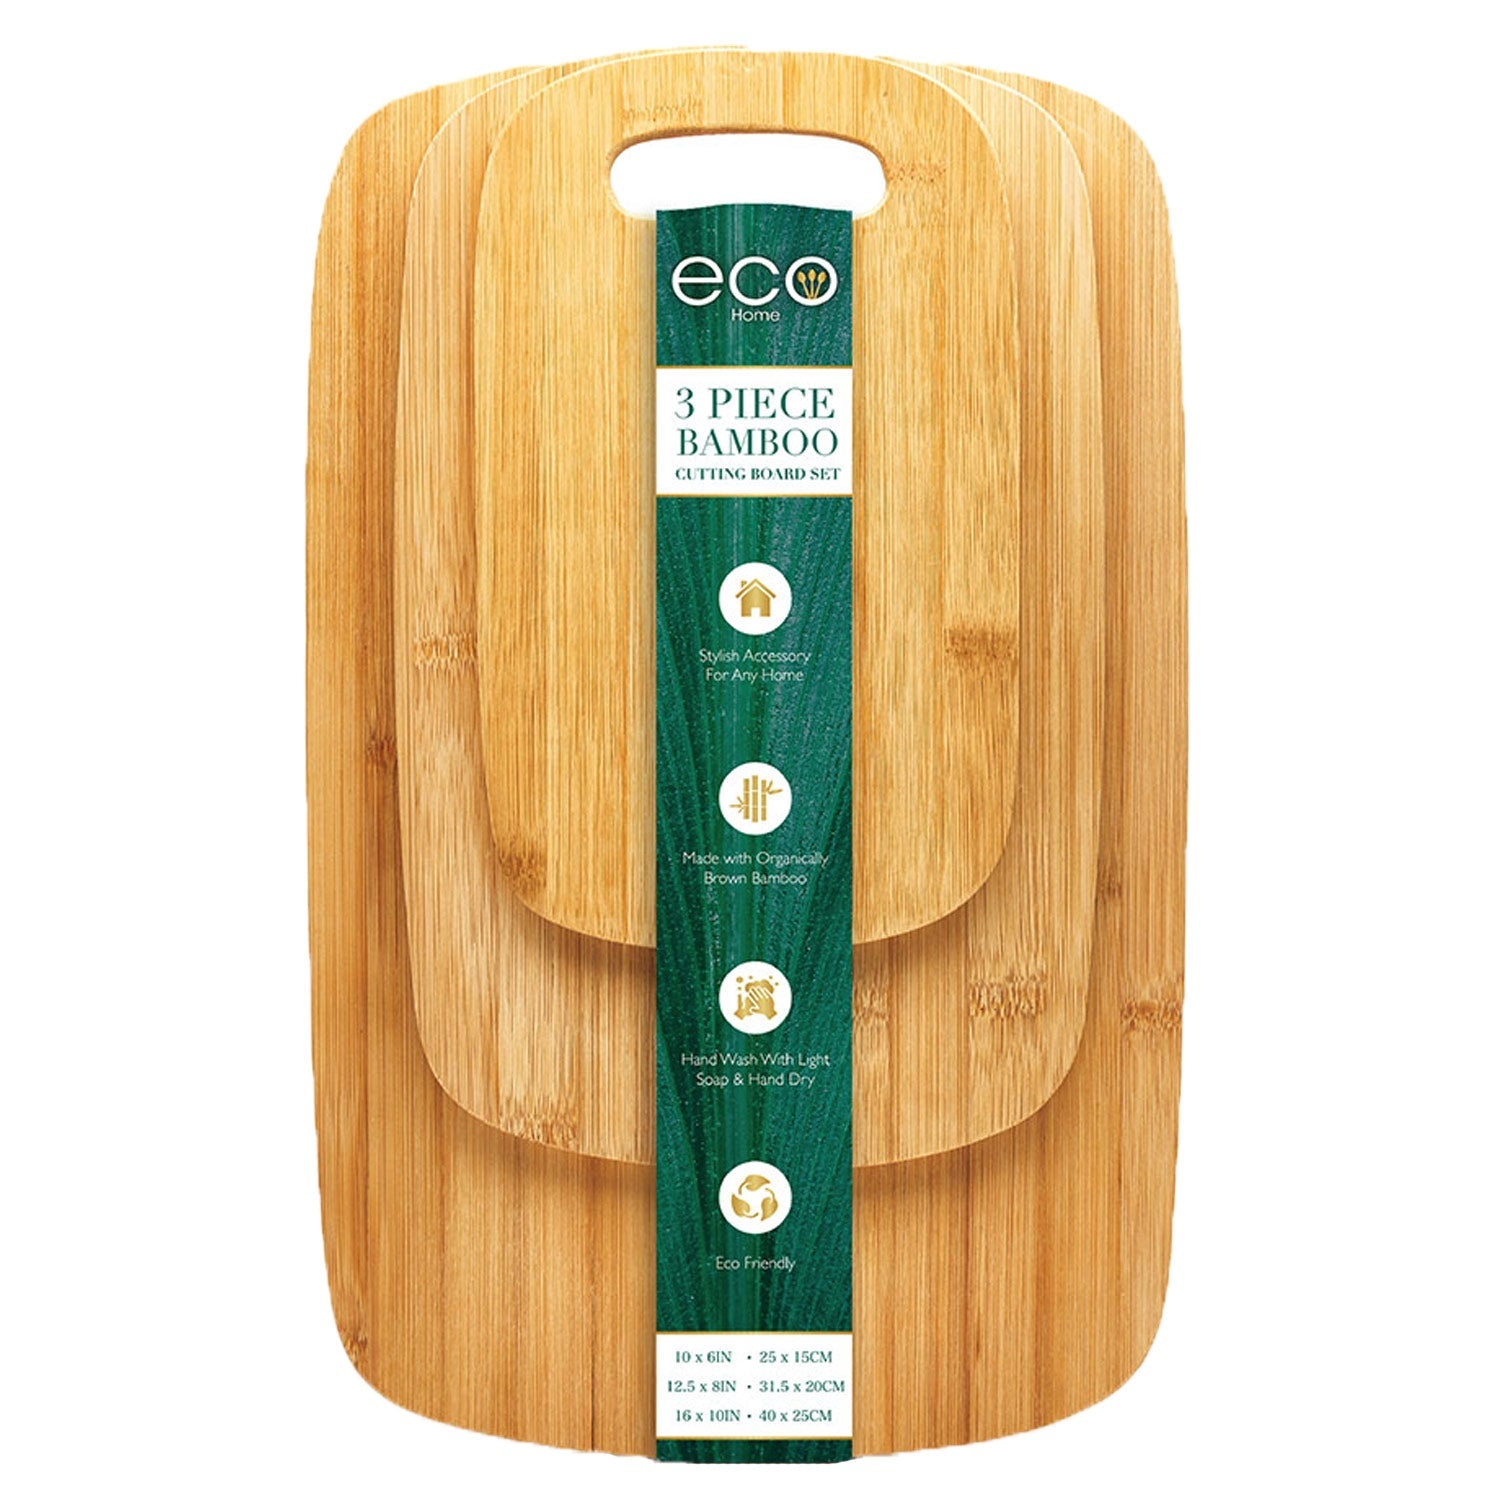 PREMIUS 3 Piece Bamboo Cutting Board Set, 10x6,12.5x8, and 16x10 Inches